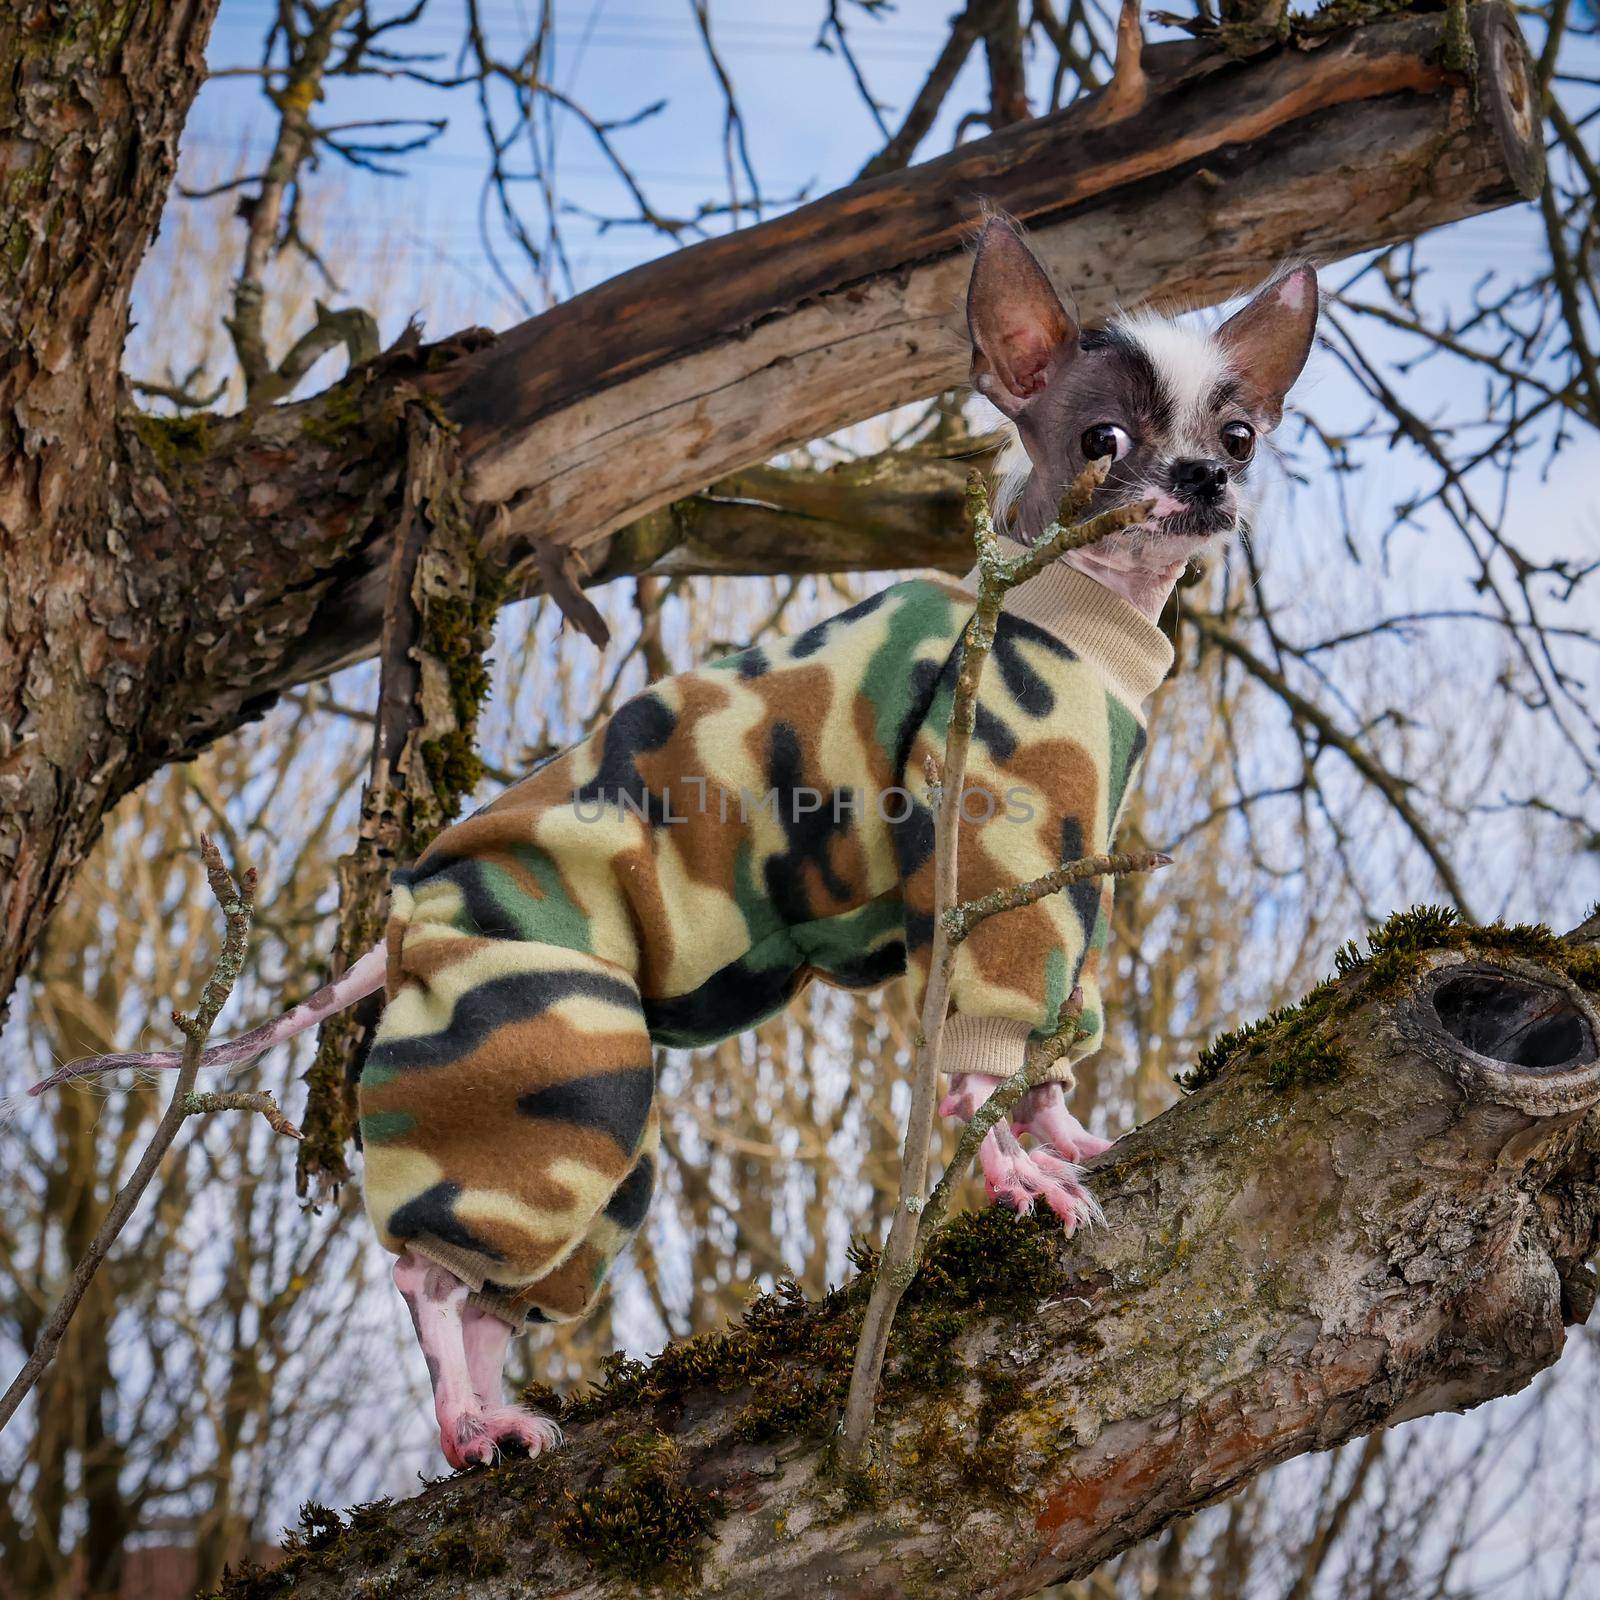 Military style peruvian hairless and chihuahua mix dog standing on the tree